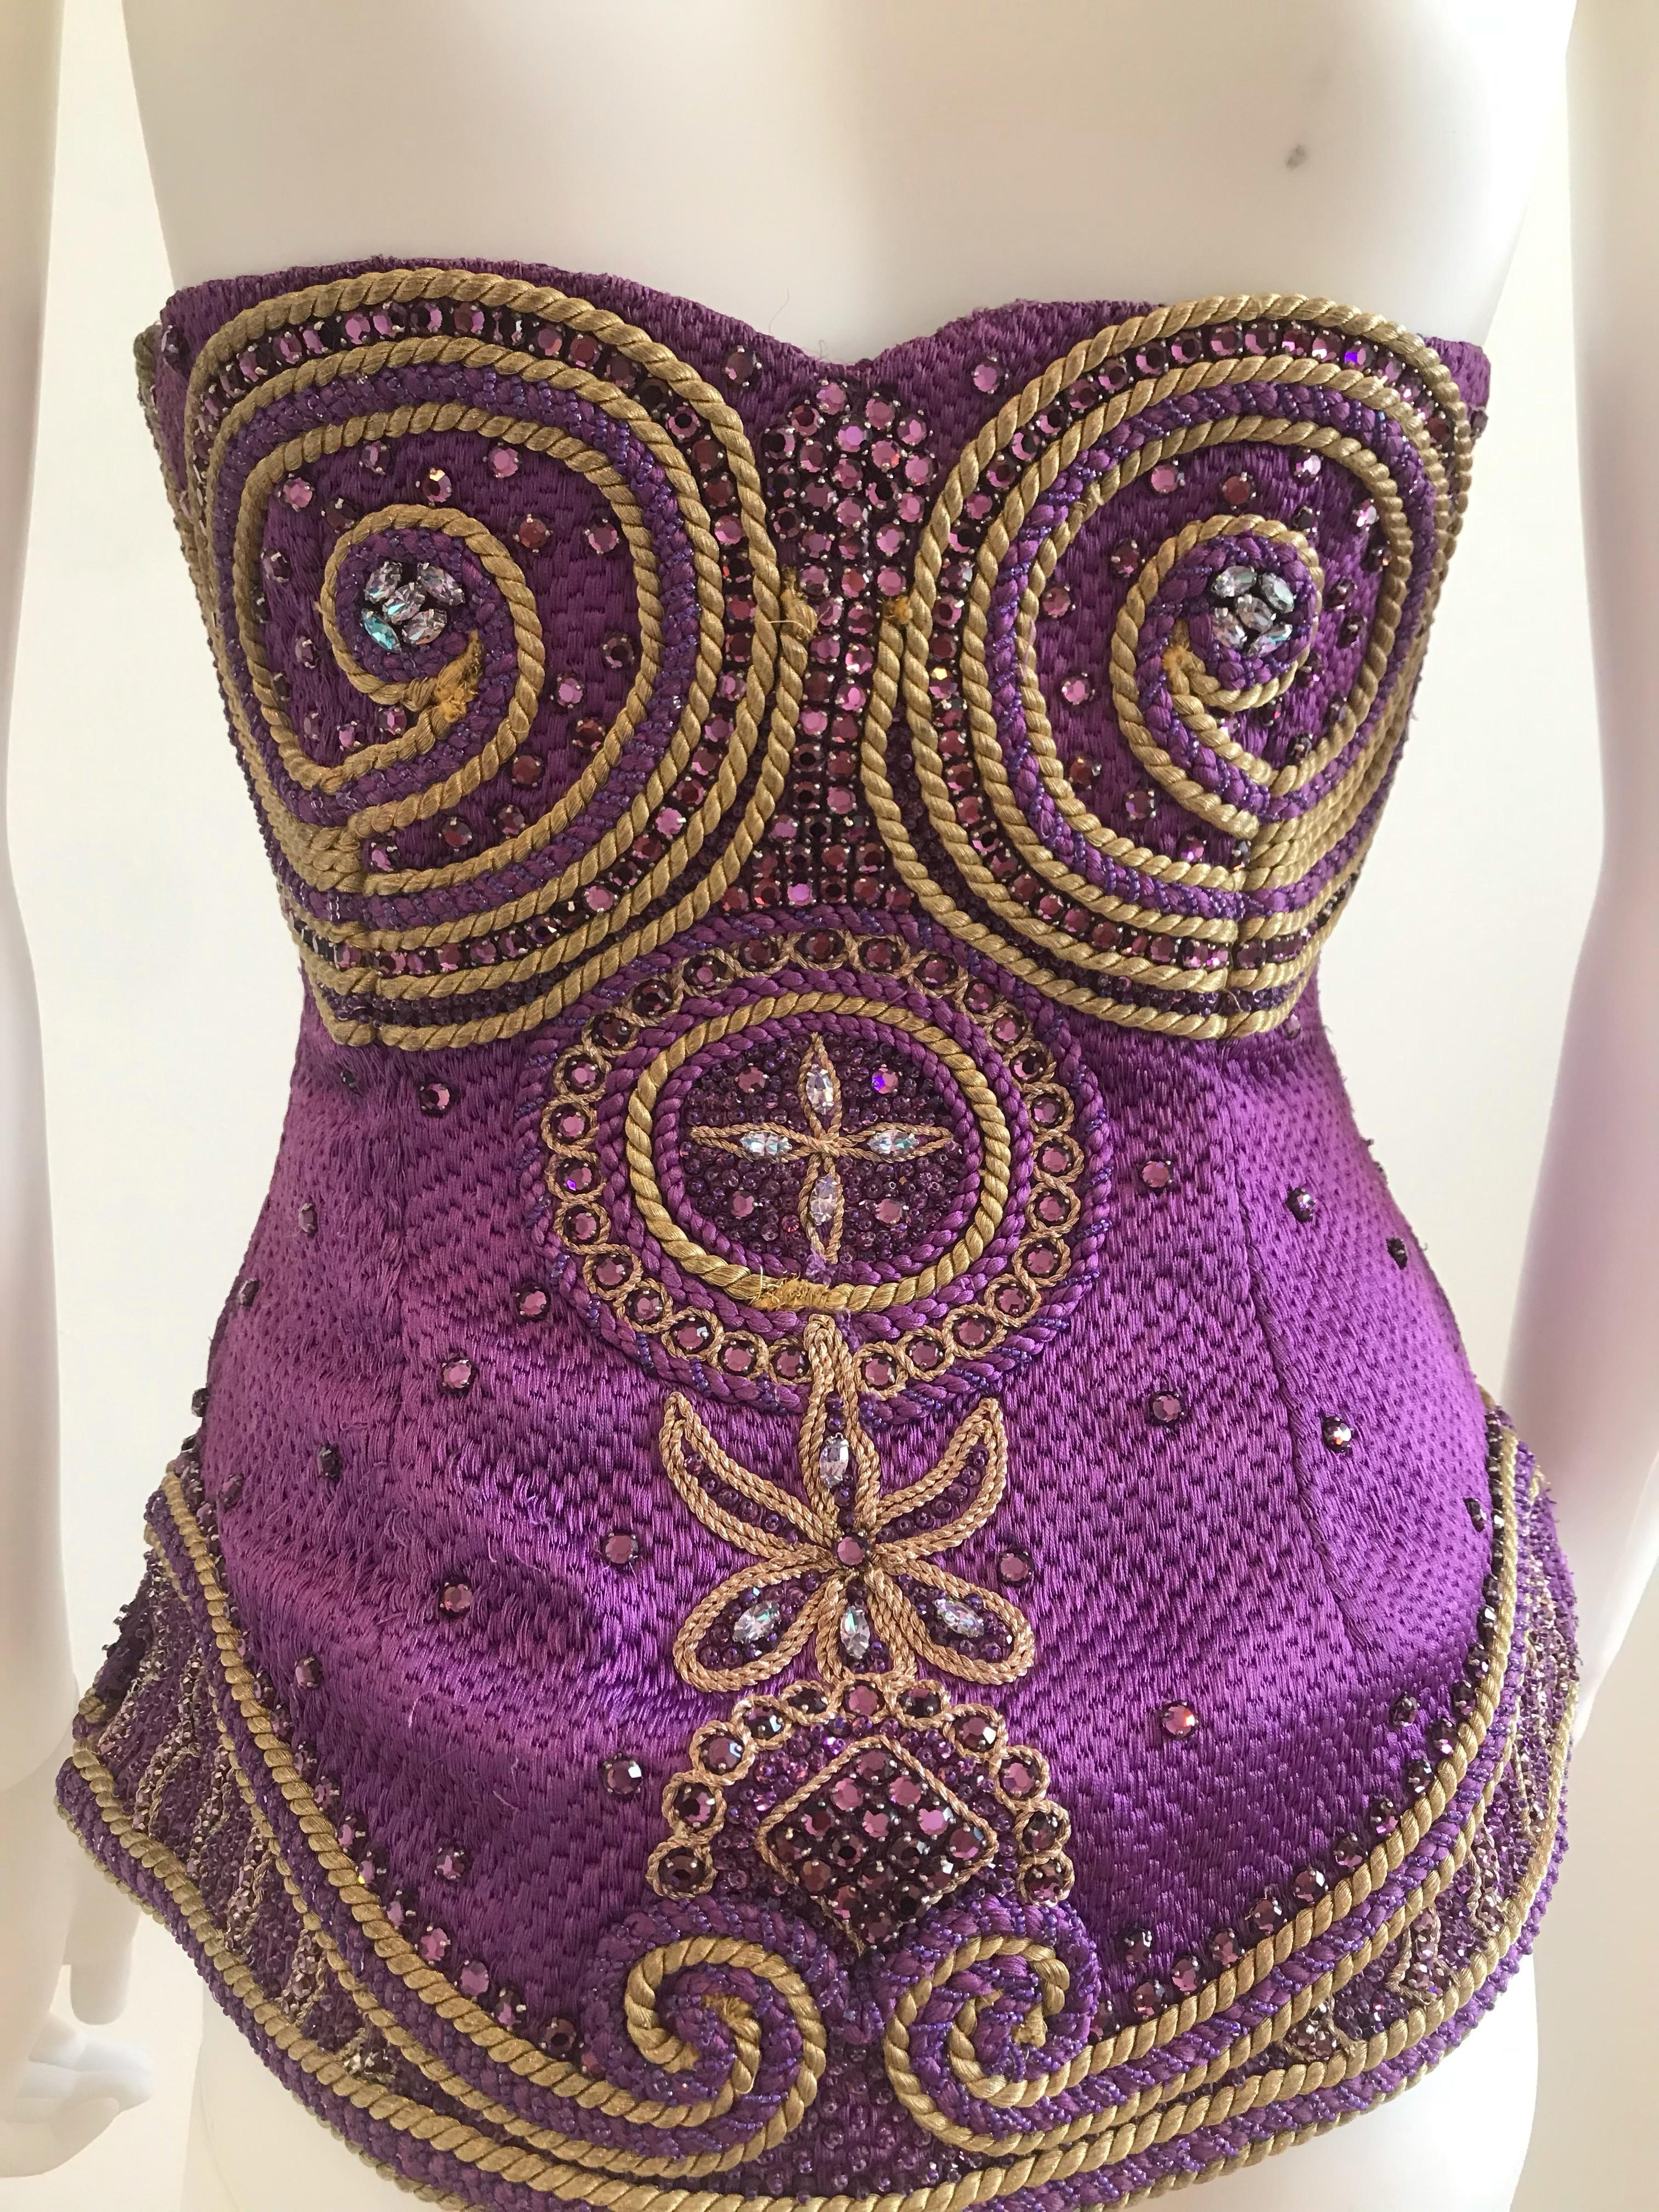 Gray Gianni Versace Couture Purple & Gold Embellished & Embroidered Bustier/Corset For Sale